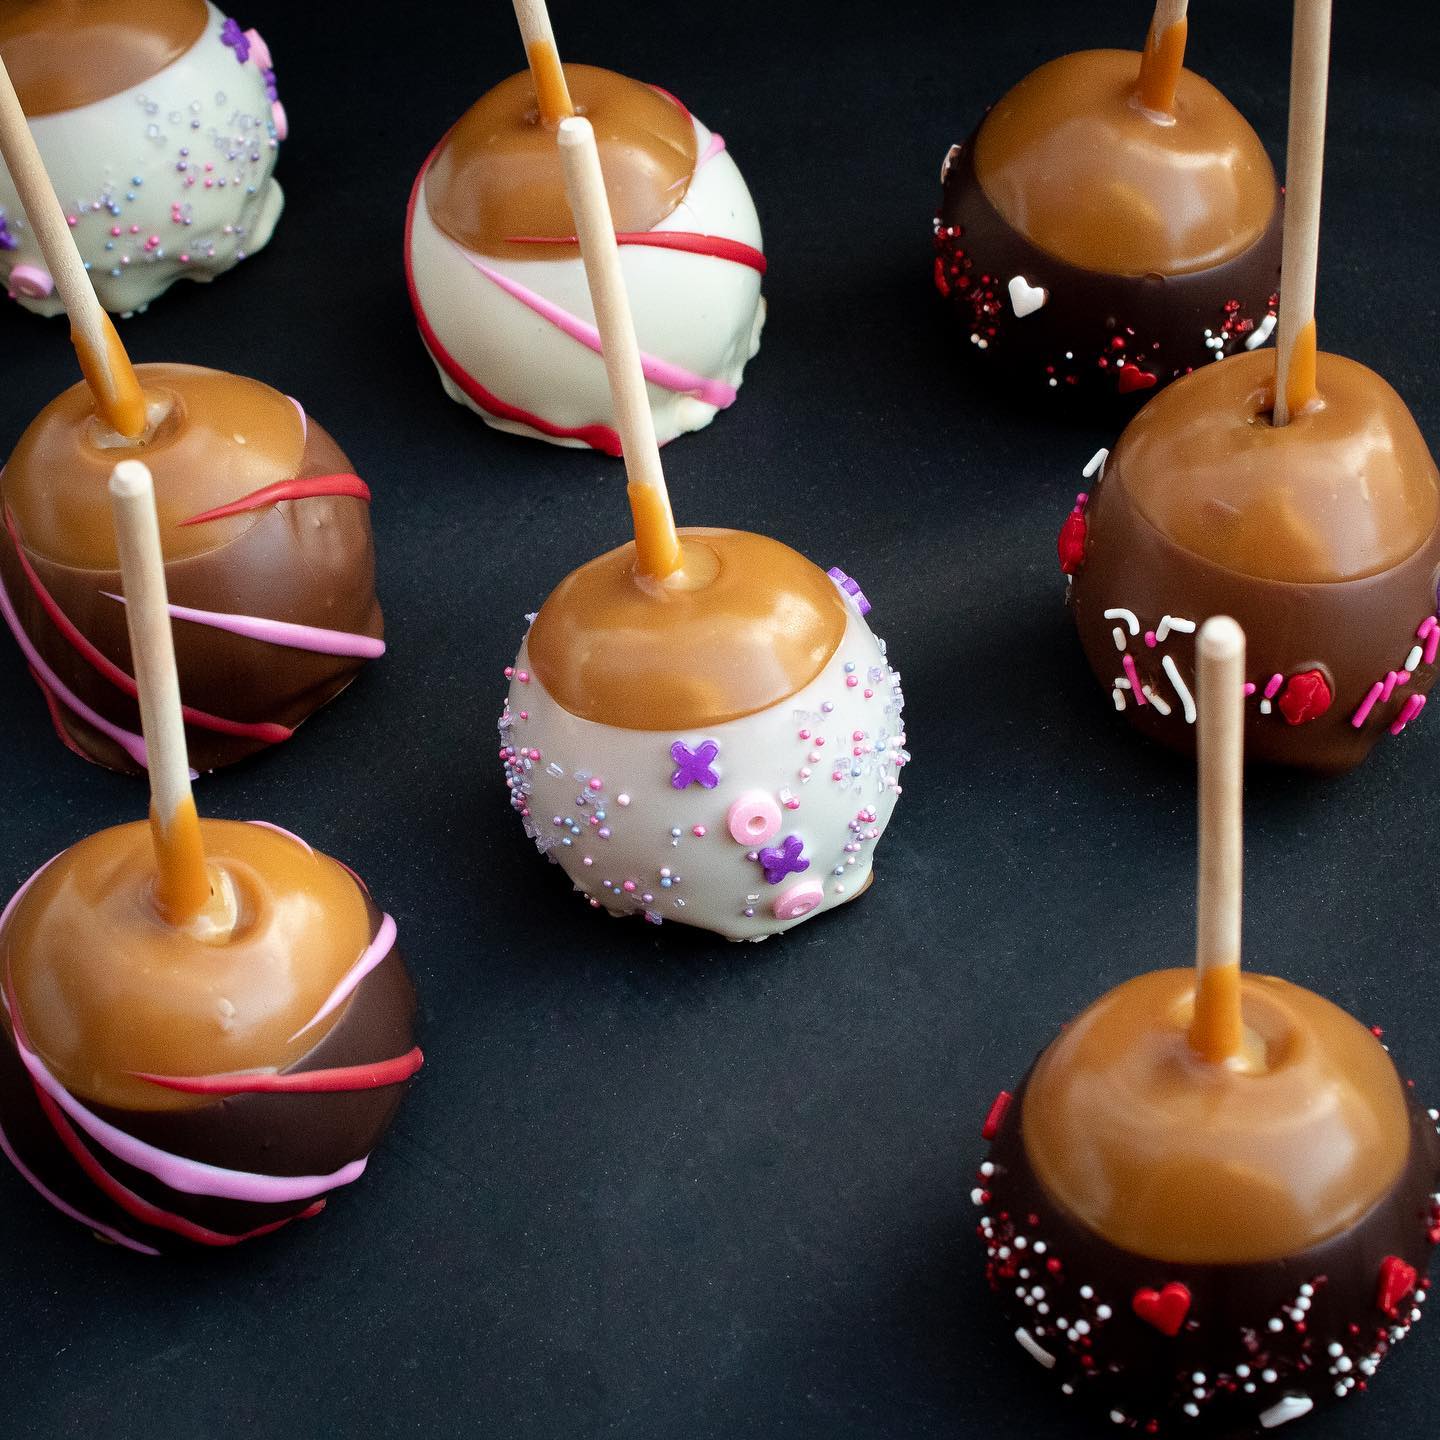 Cute candy apples with heart sprinkles for Valentine's Day from Birmingham Candy Company